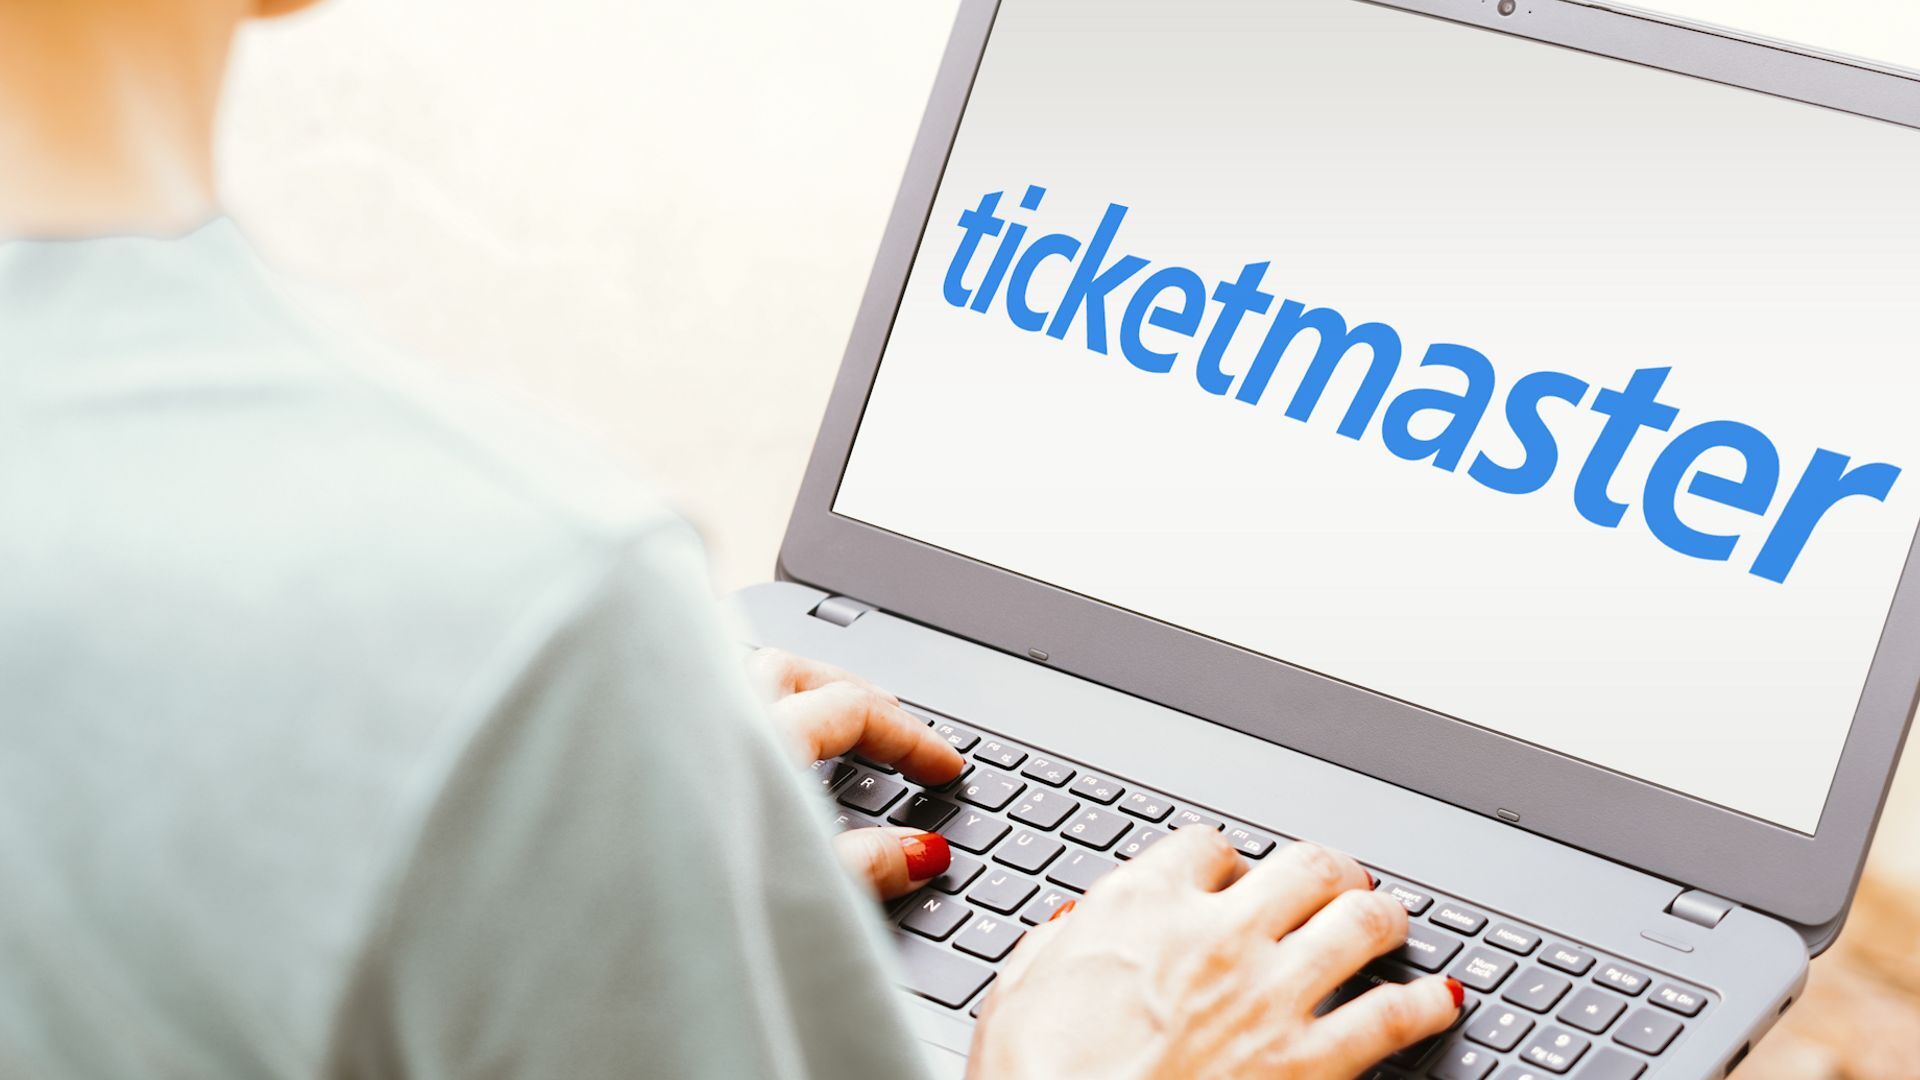 A hacking group claims it has stolen the personal data of more than 550 million Ticketmaster customers — and that info is on sale